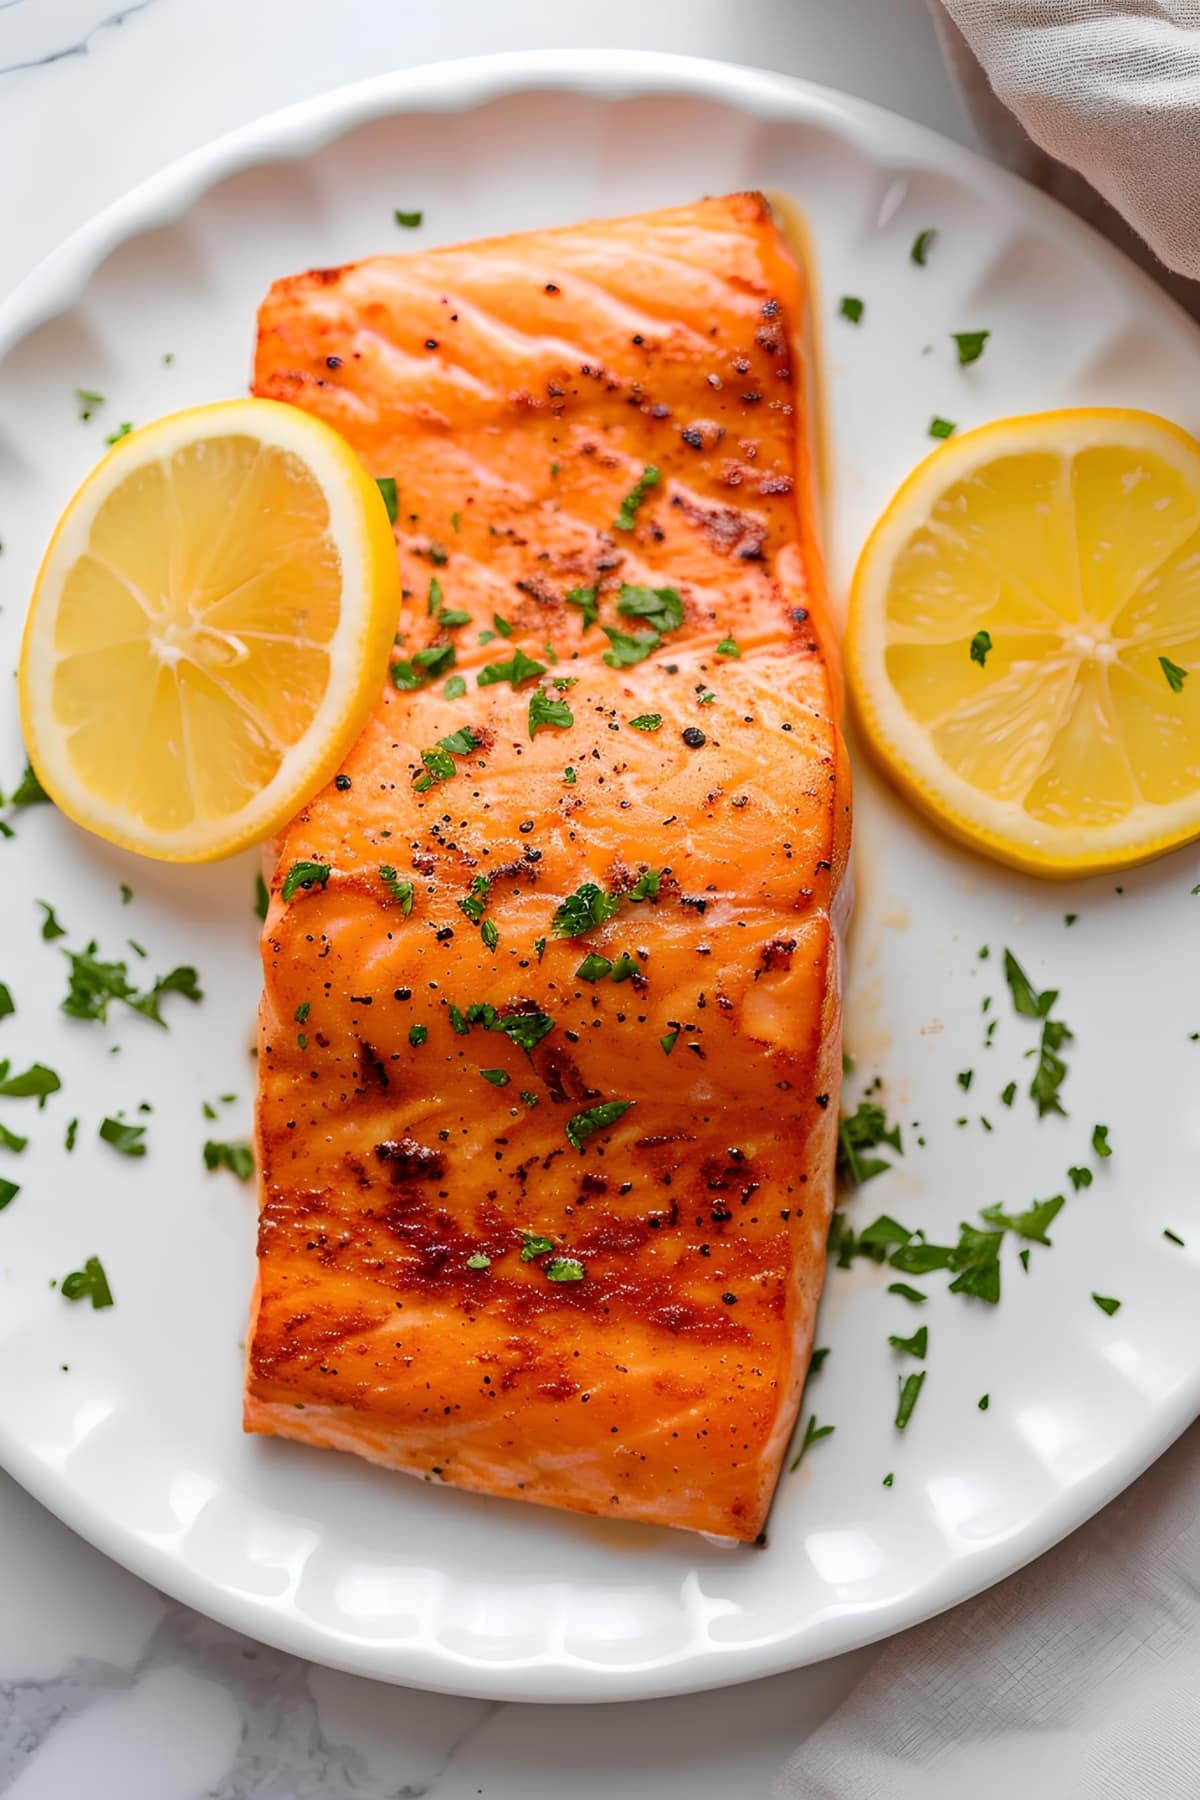 Tender and juicy salmon fillet with lemon wedges in a white plate